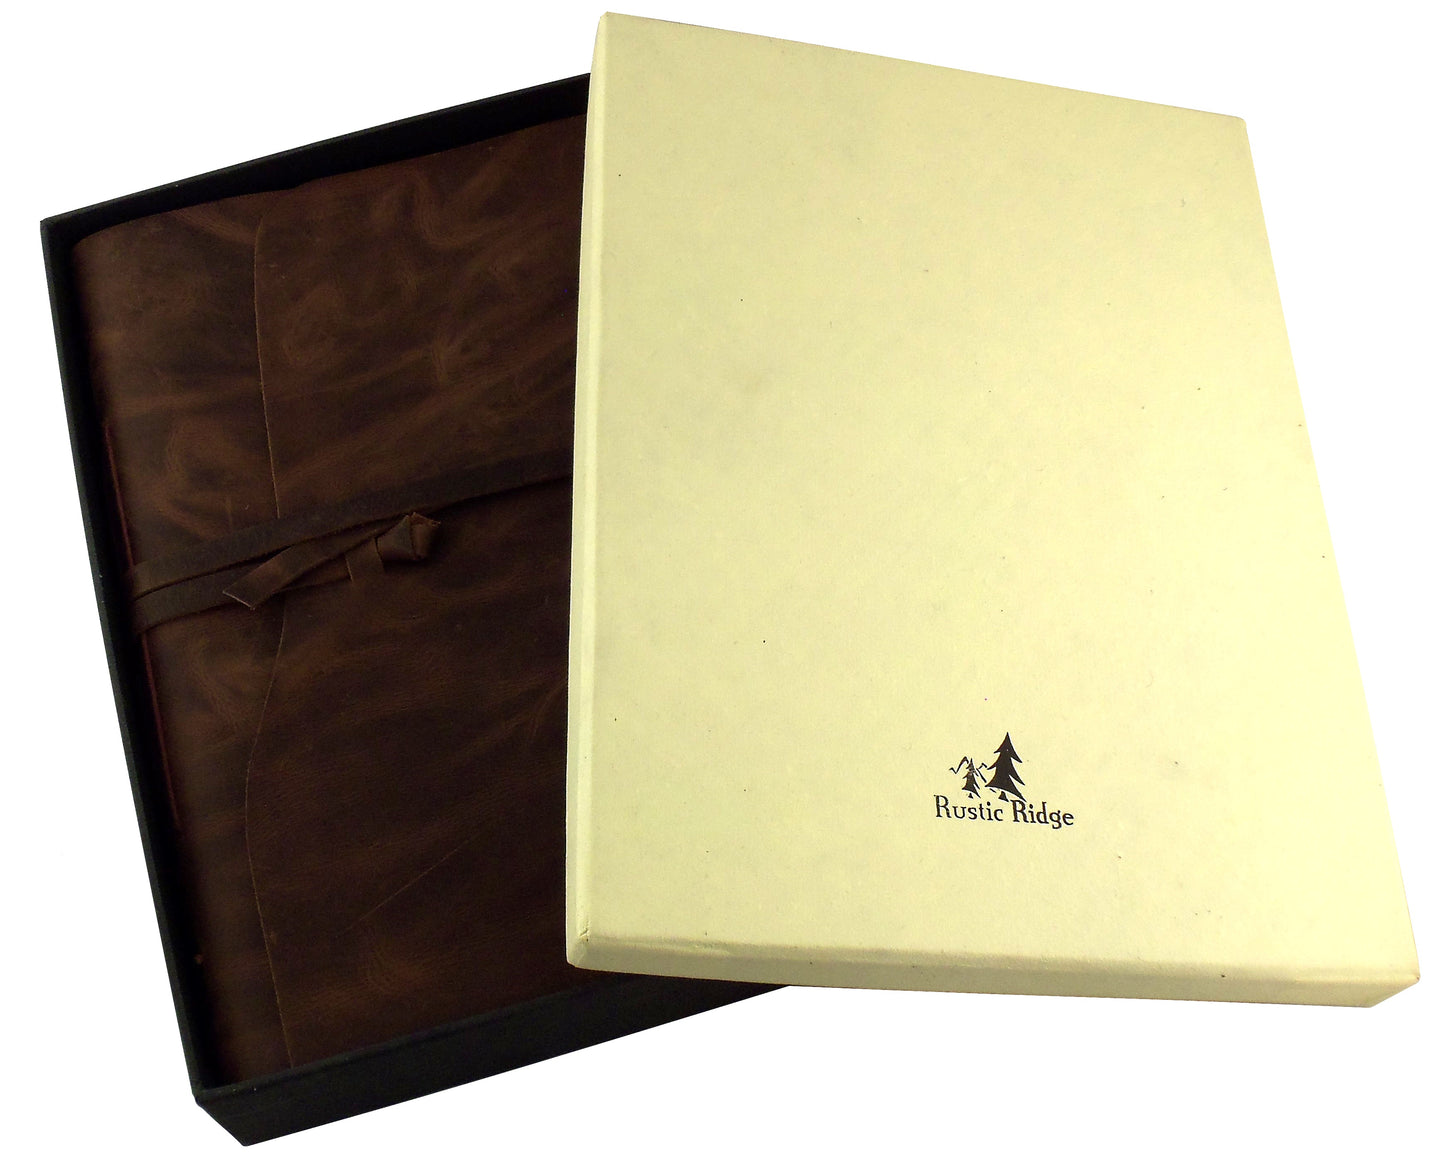 Large Genuine Leather Scrapbook Photo Album with Gift Box - Holds 200 4x6 or 5x7 Photos - 9x12" - Rustic Ridge Leather